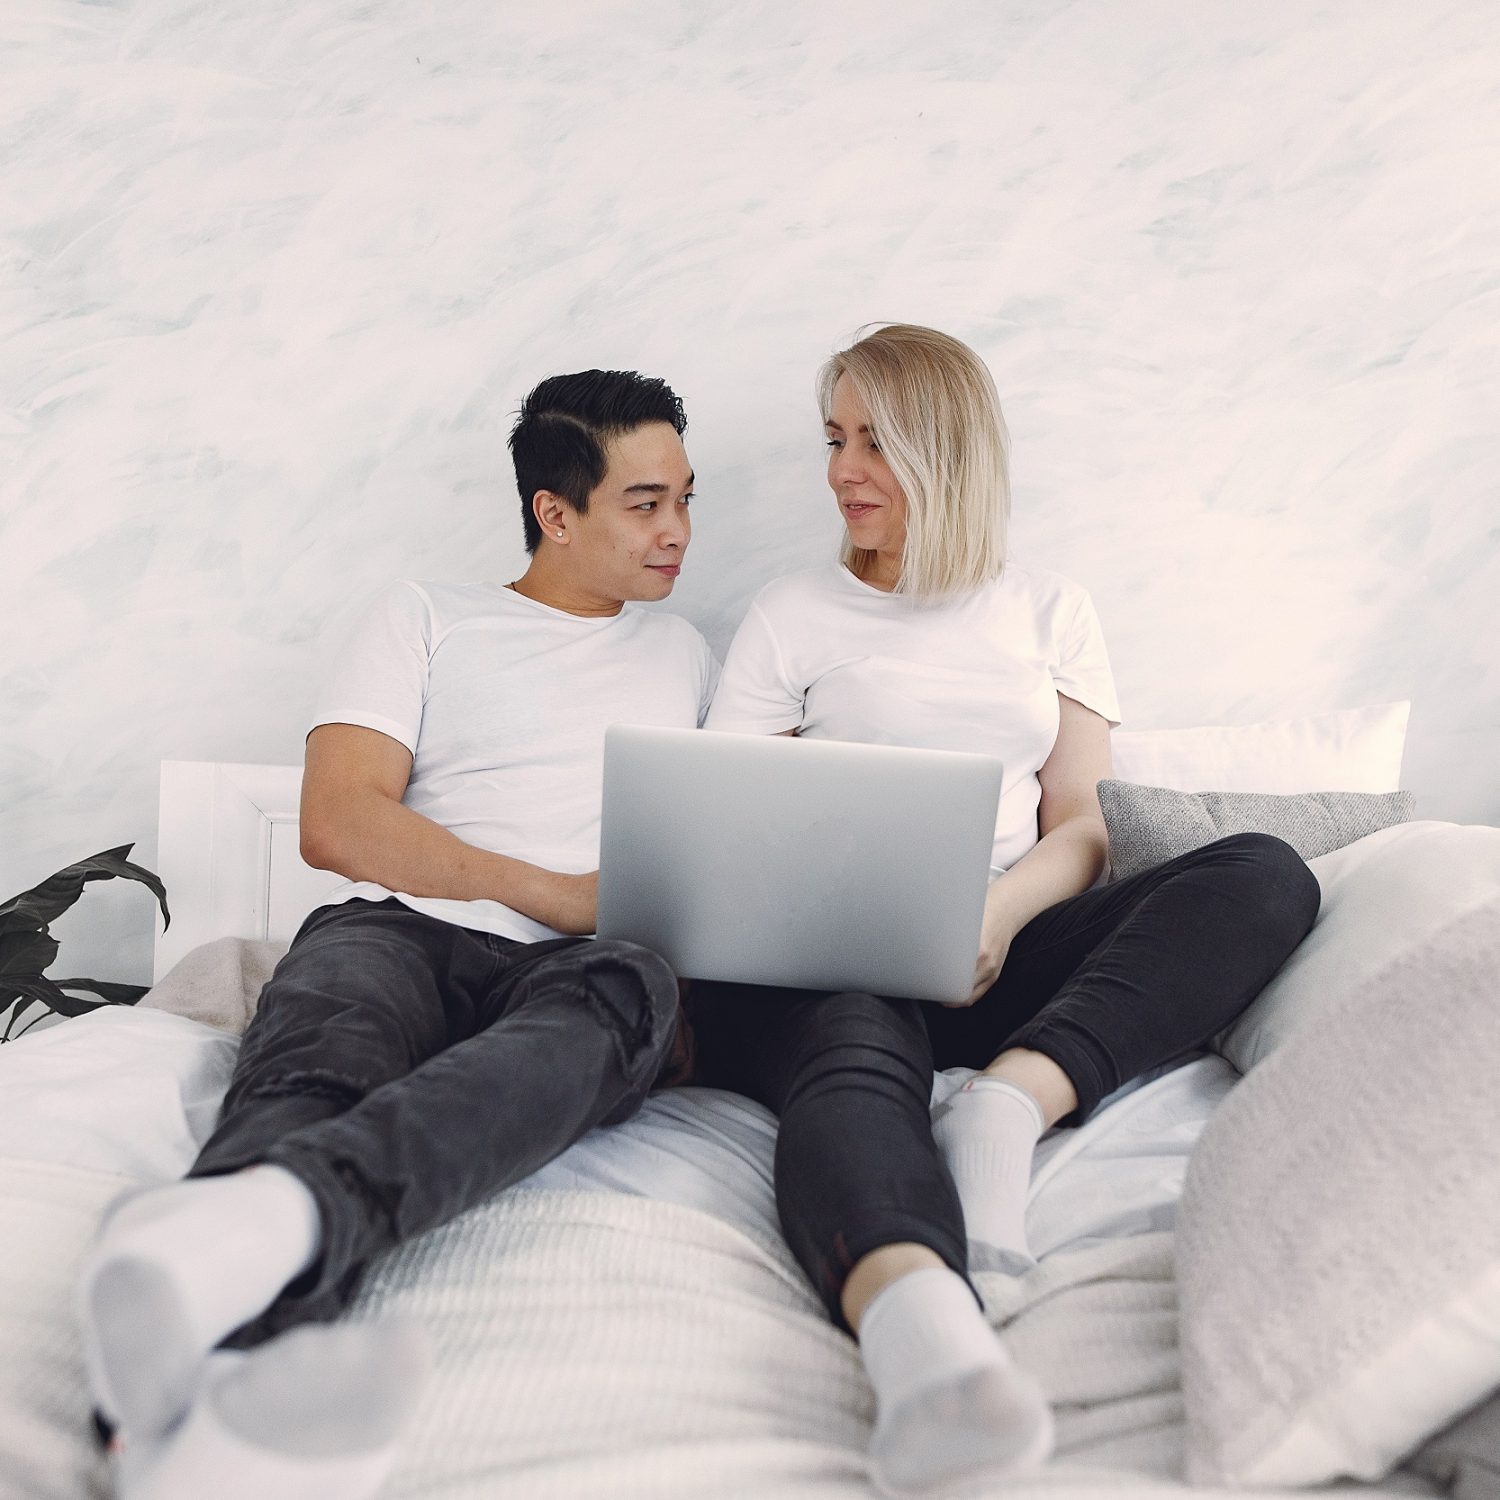 Canva - Man And Woman Sitting On A Bed.jpg 2500 px